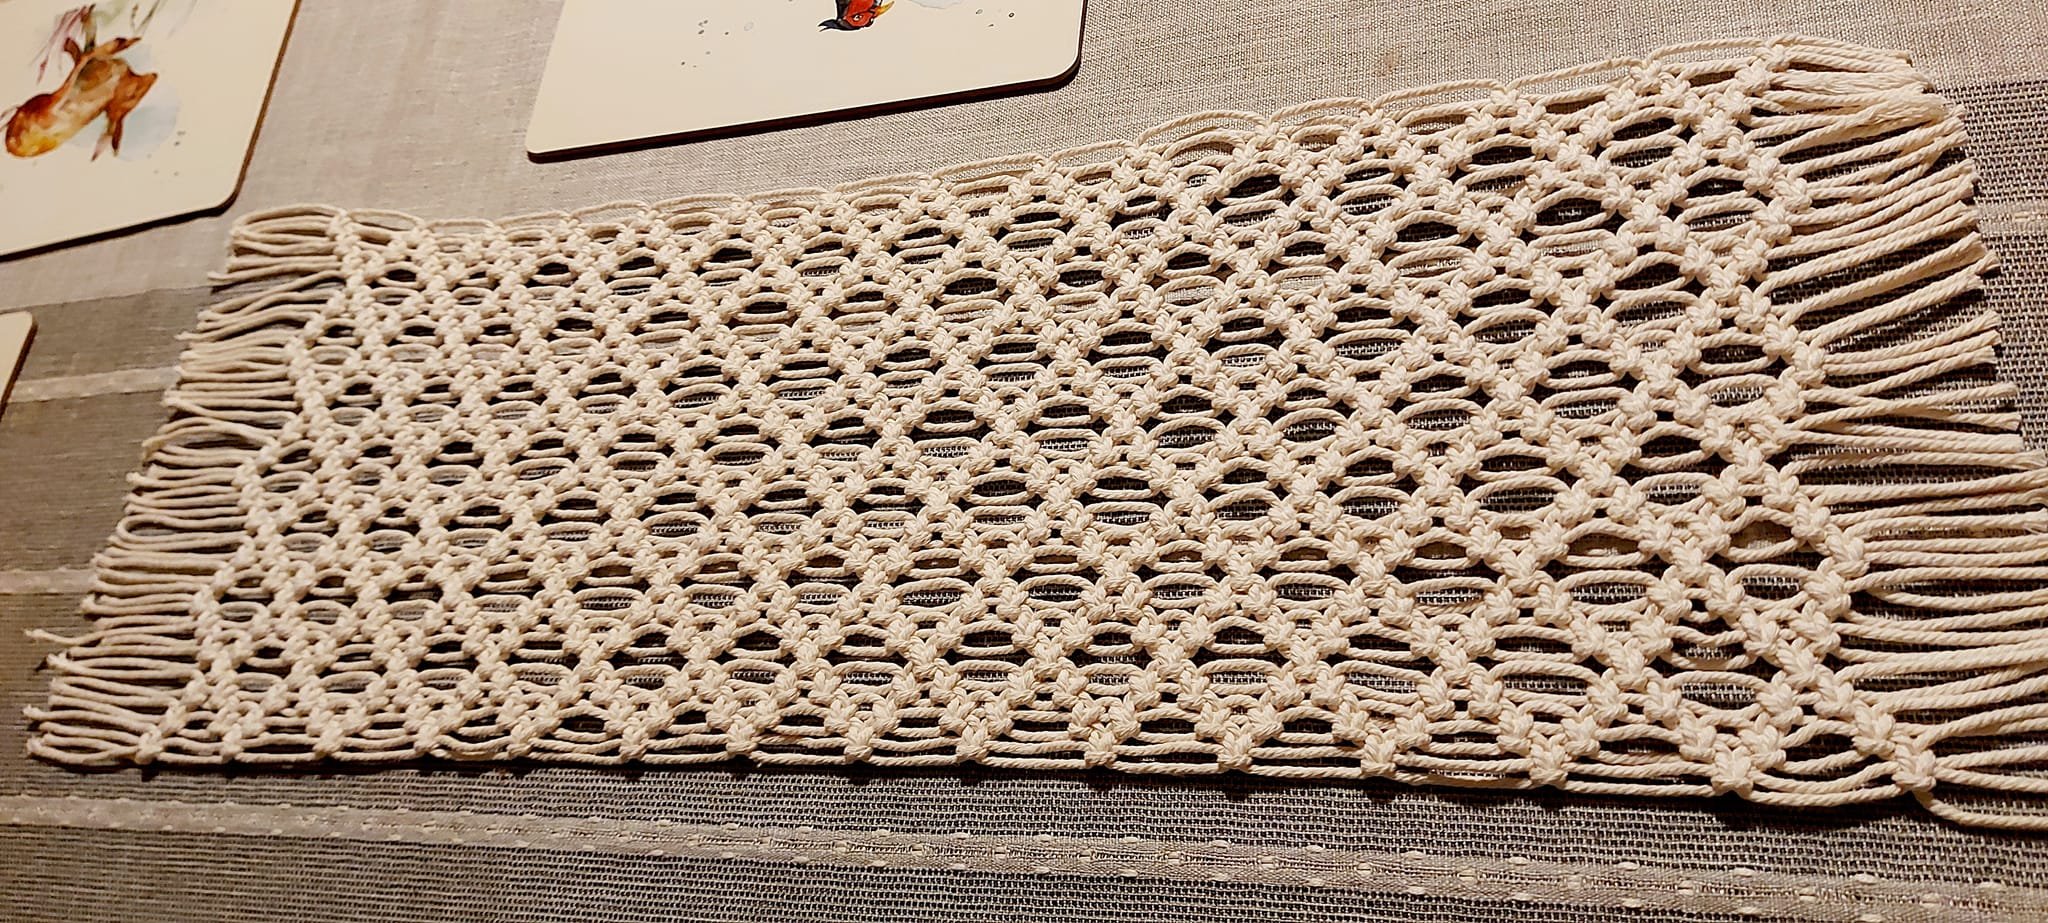 Macrame for beginners - Placemat